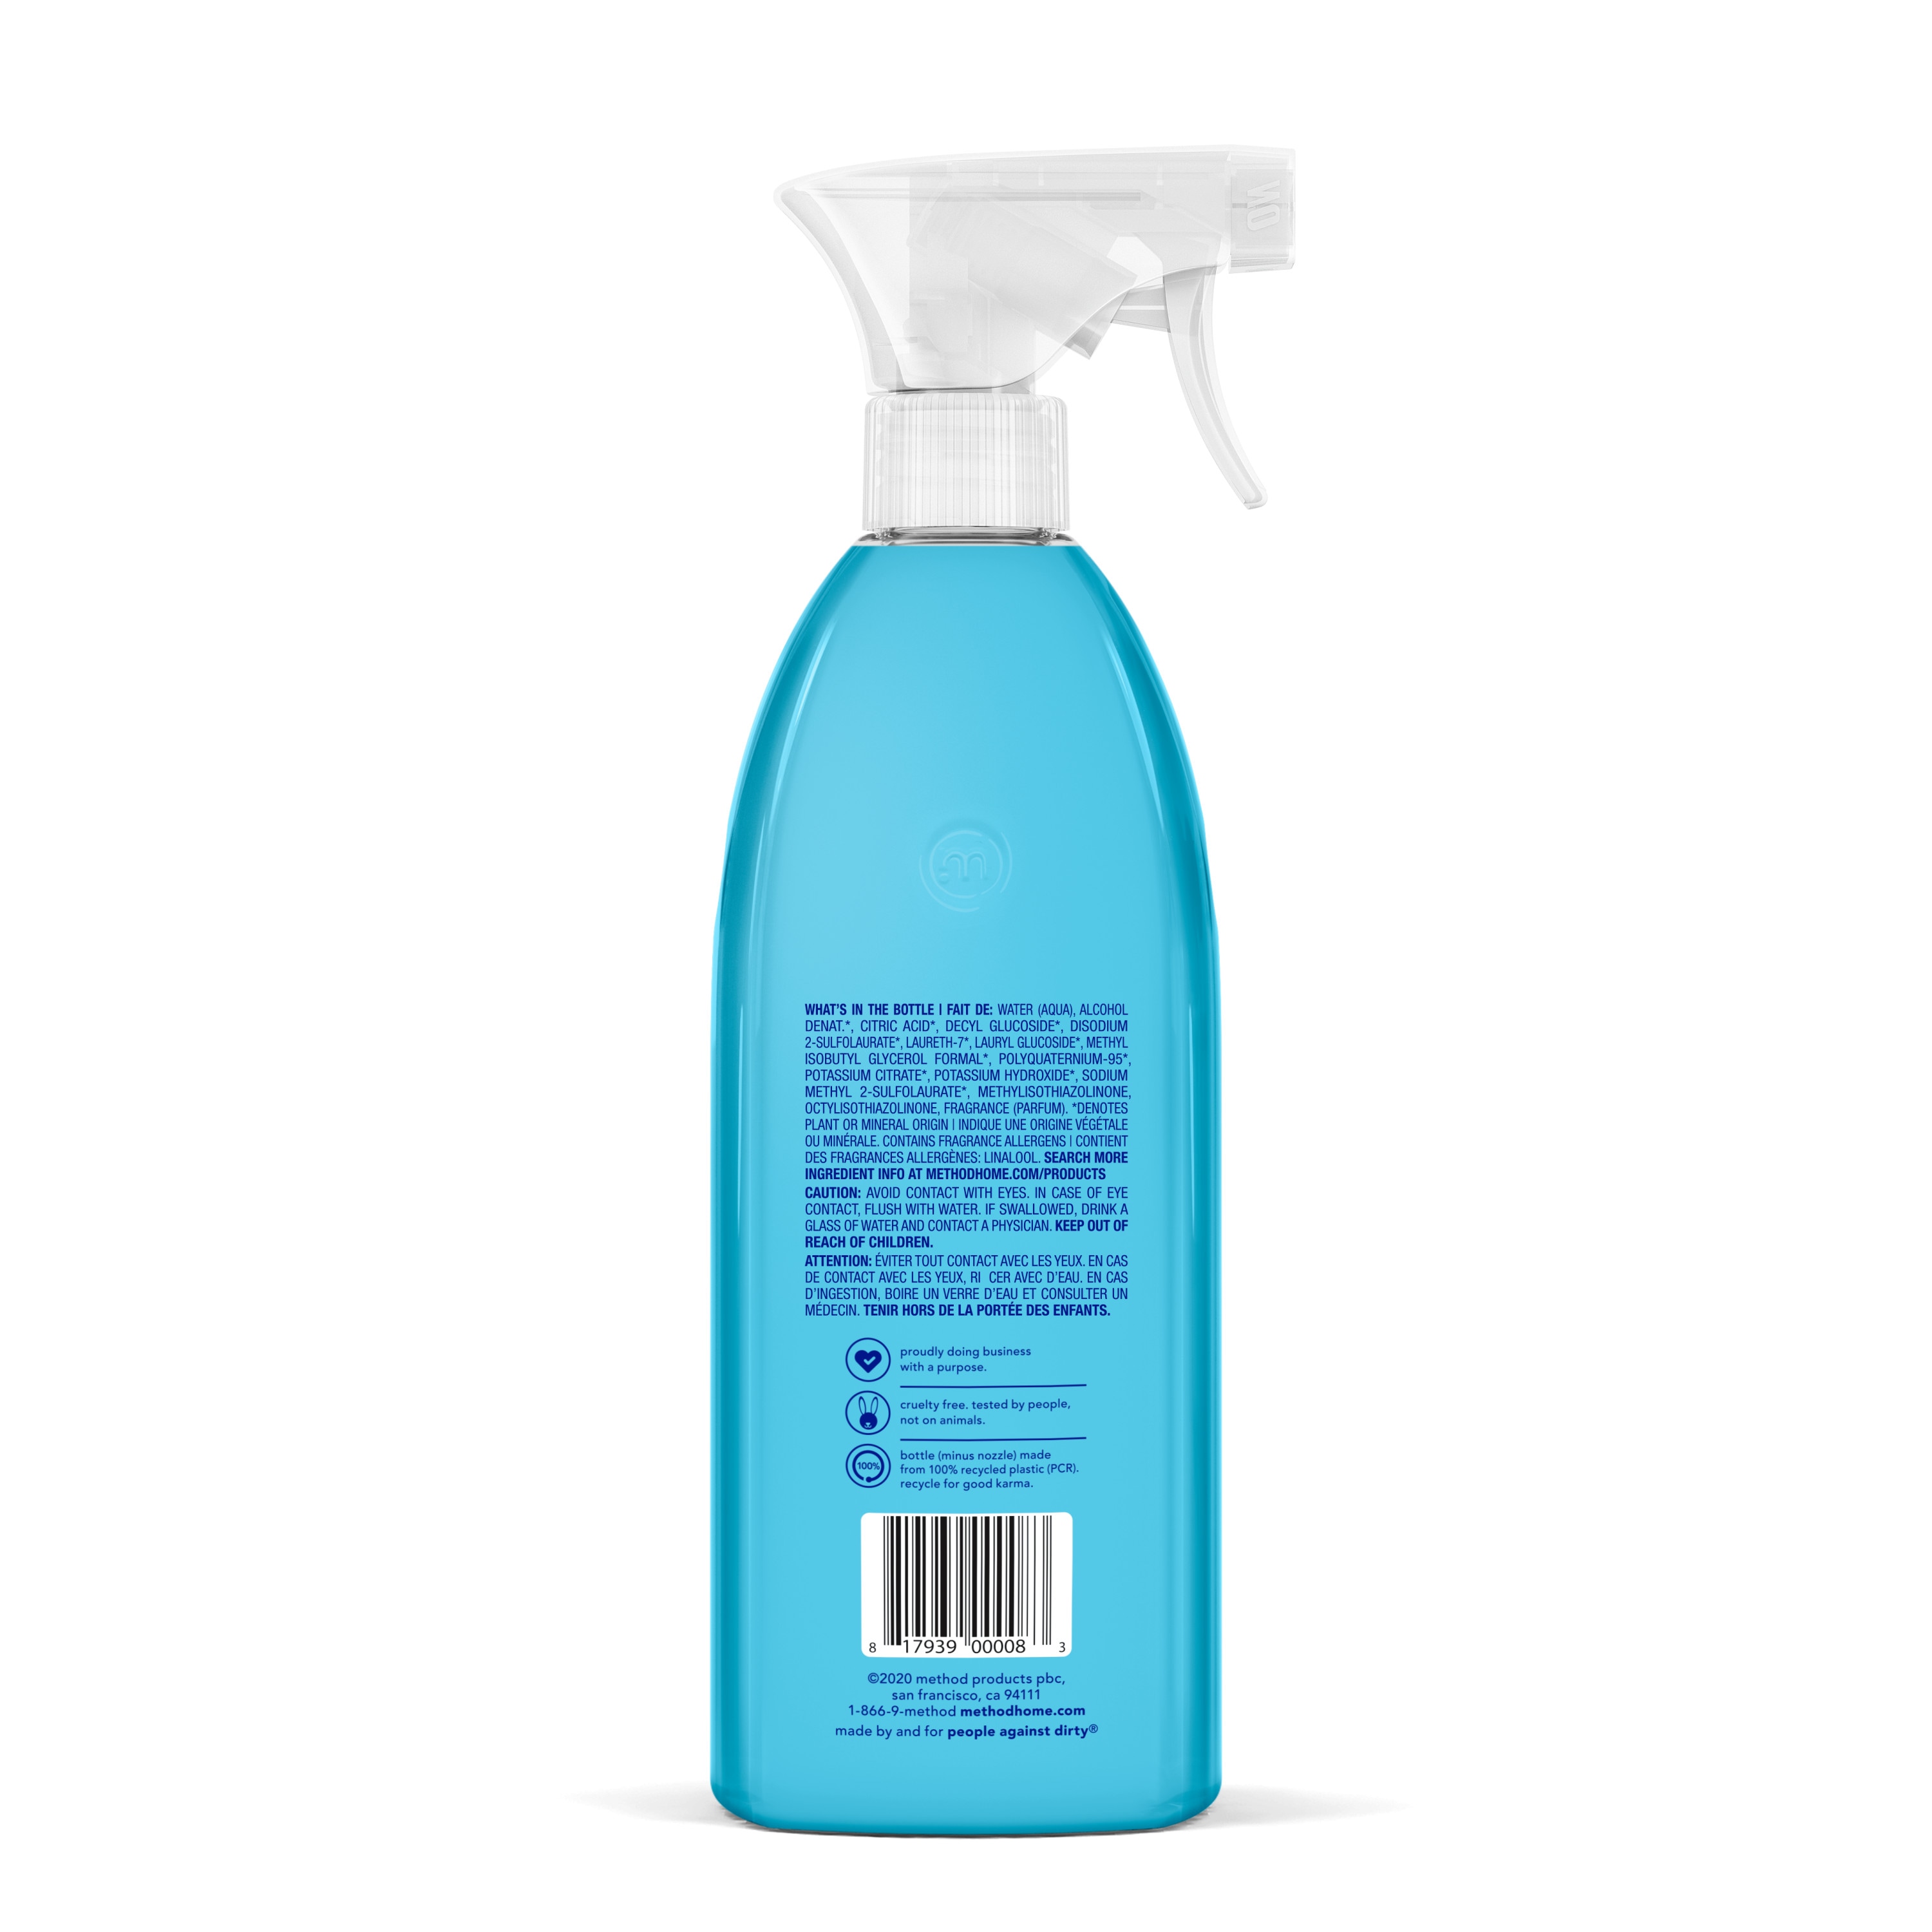 PÜR Evergreen® Eucalyptus Mint Concentrated Cleaning Solution 2 fl oz